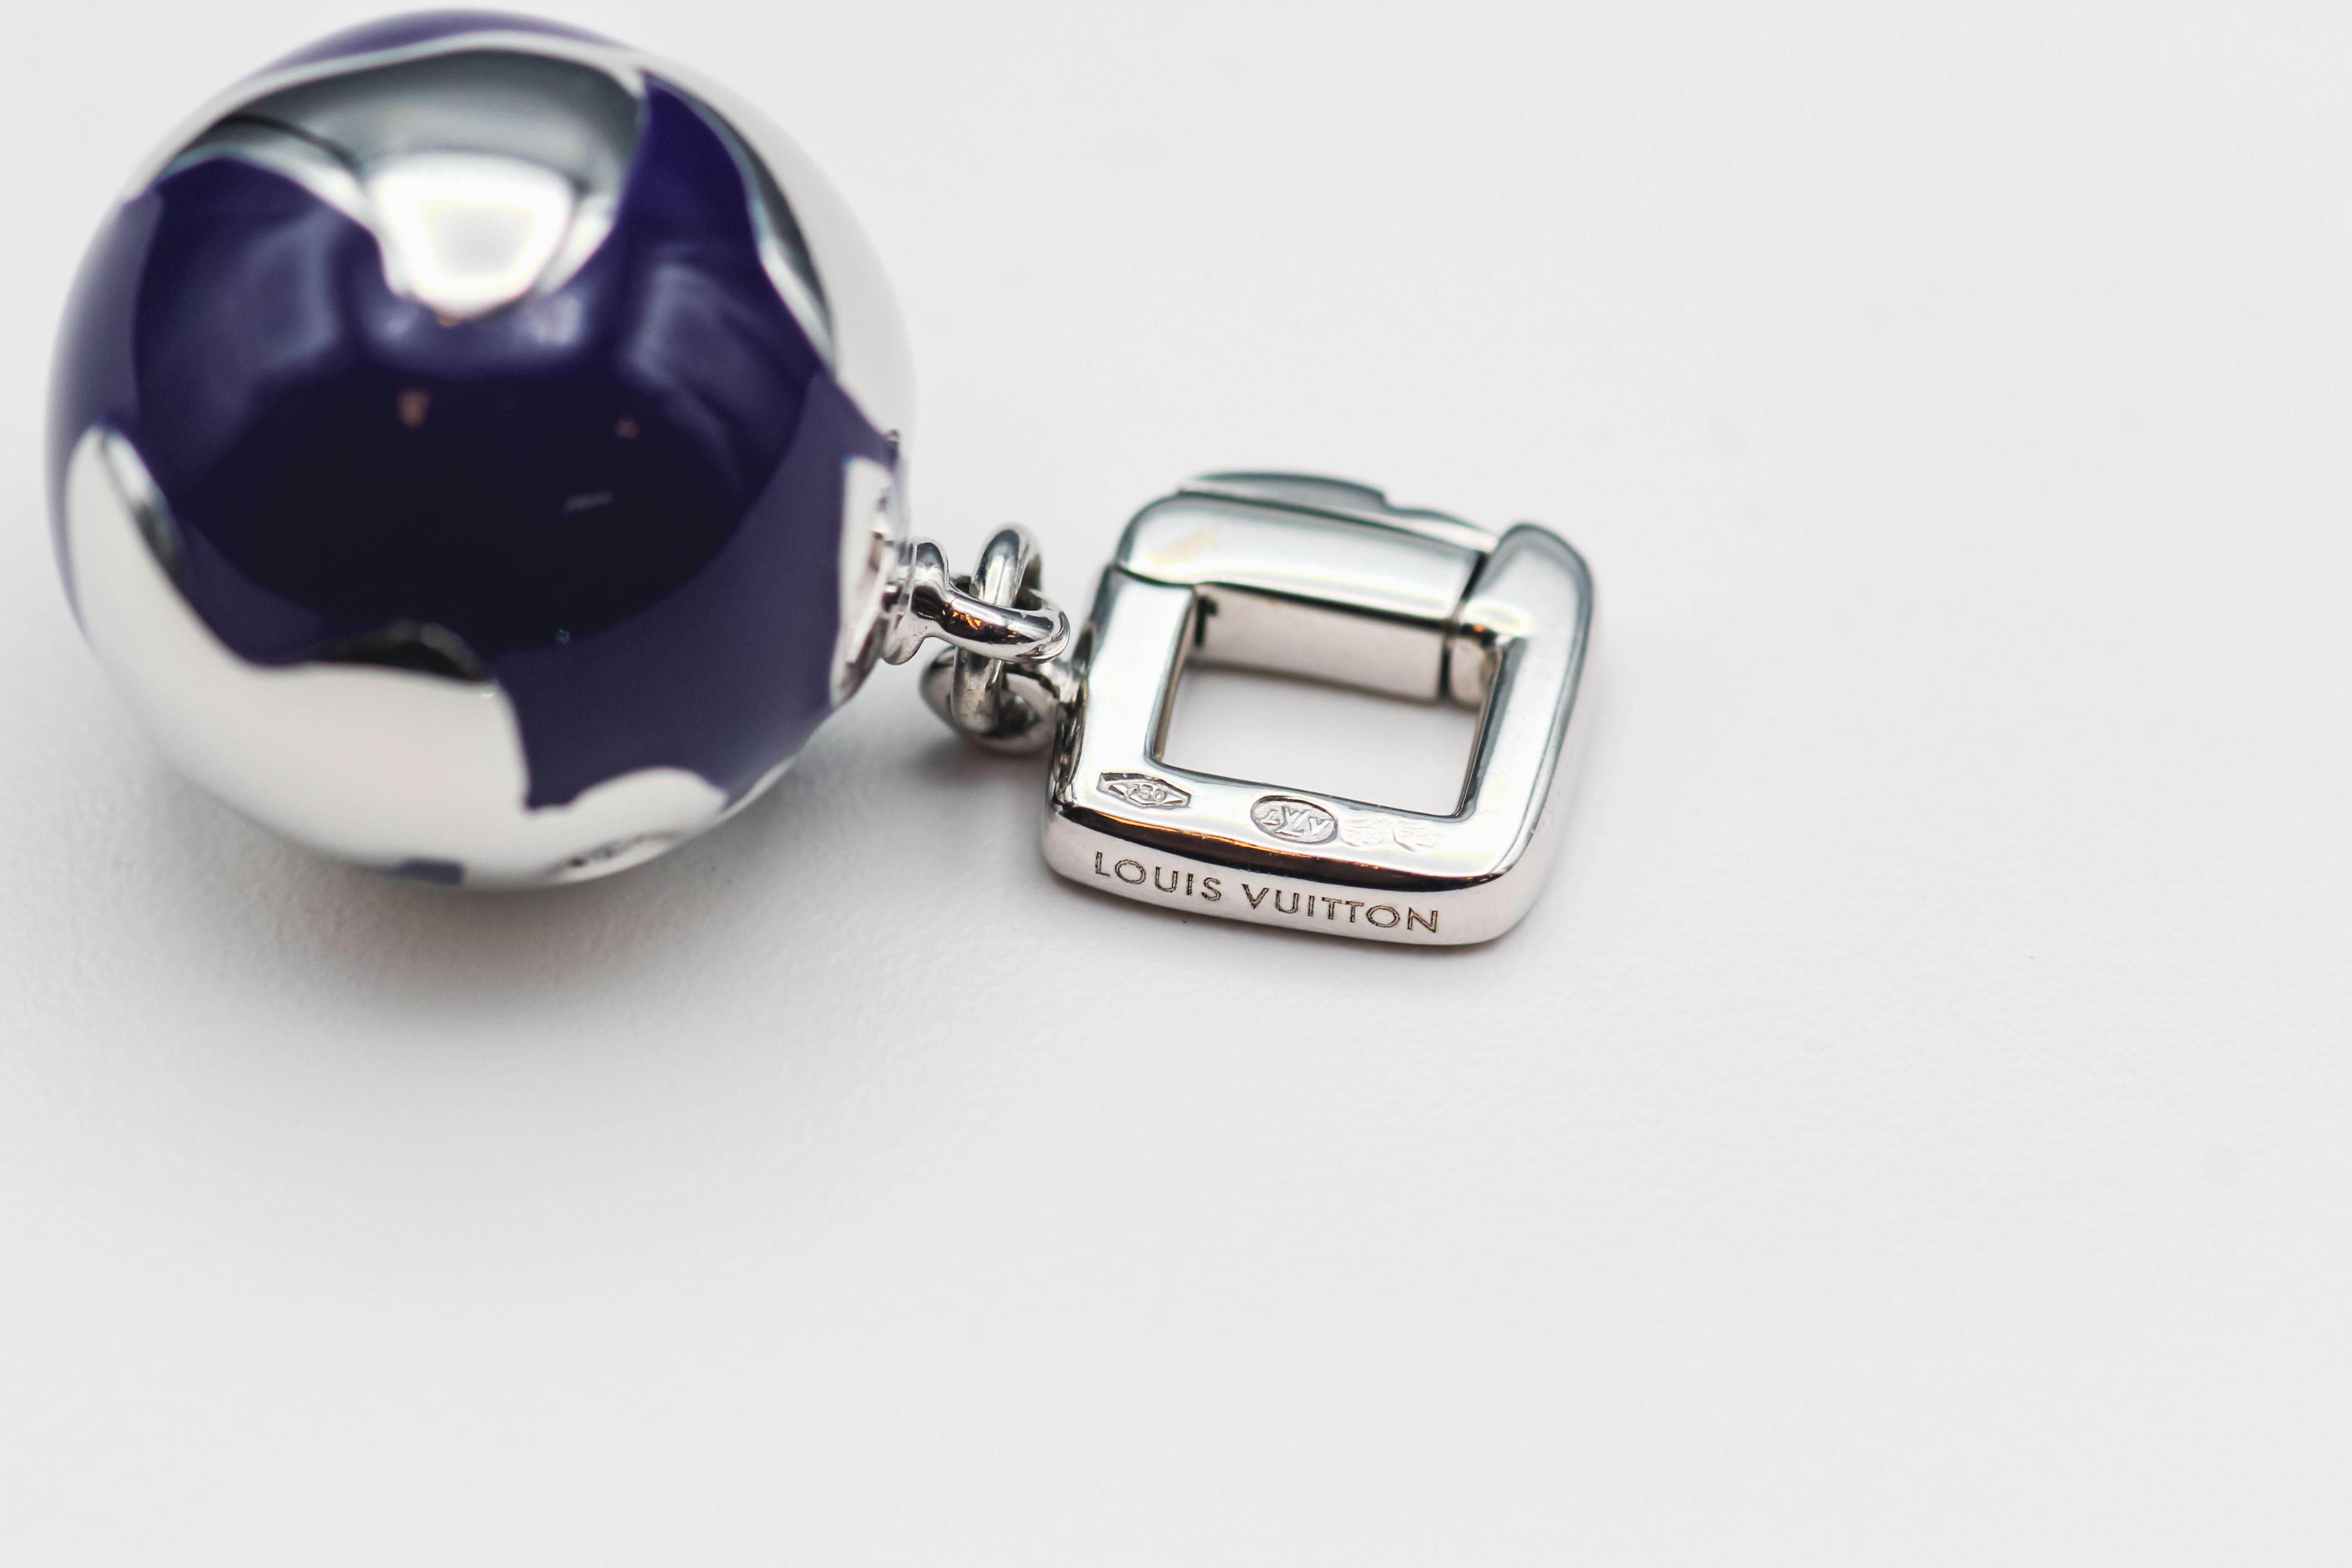 Louis Vuitton Diamond Enamel 18k White Gold Globe Charm Pendant In Excellent Condition For Sale In Bellmore, NY